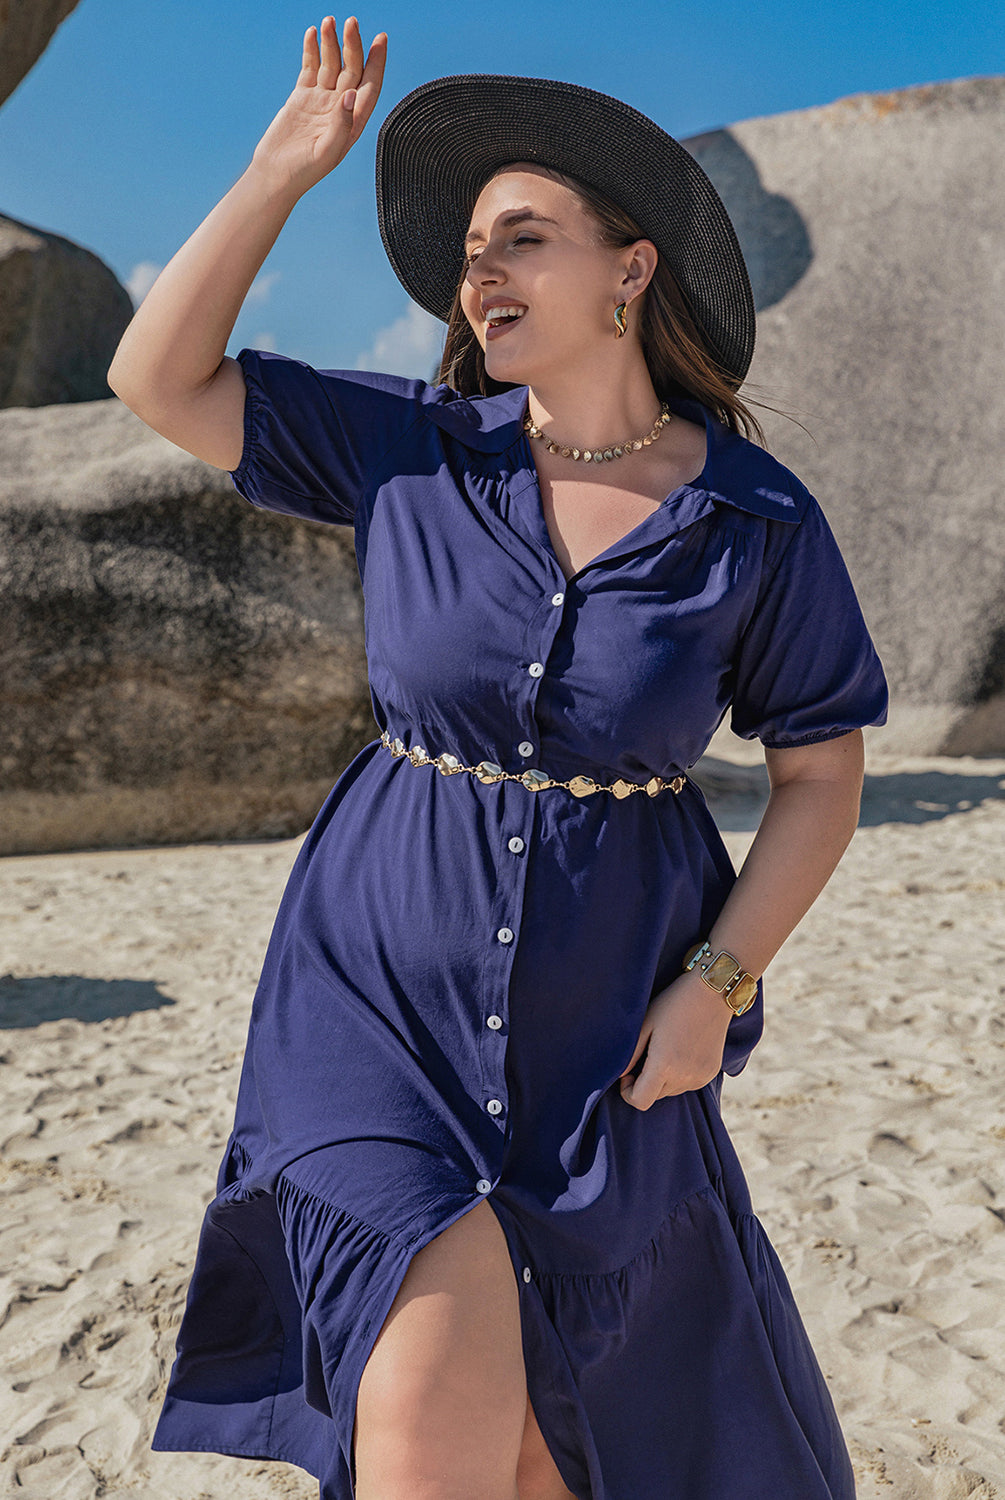 Woman wearing a plus size blue collared short sleeve midi dress, standing on a sandy beach with a large rock formation in the background.